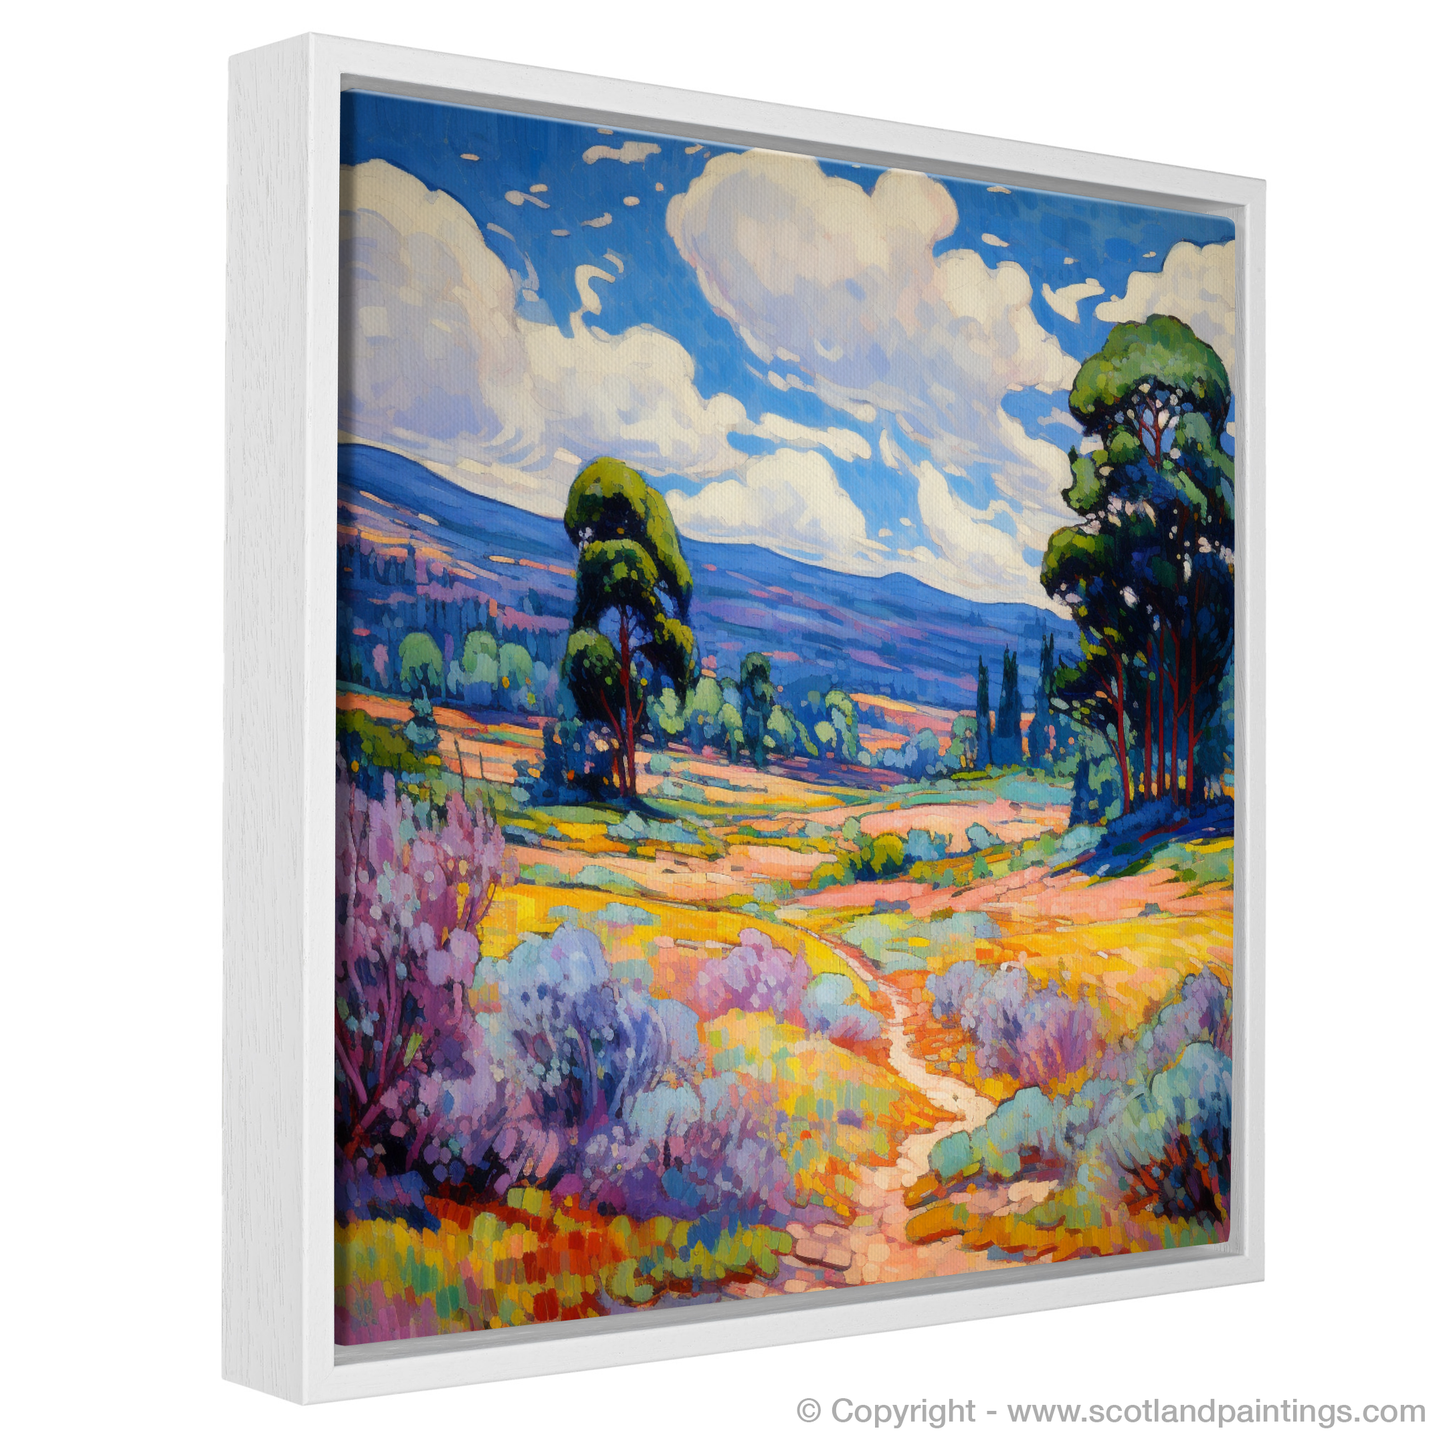 Painting and Art Print of Glen Tanar, Aberdeenshire in summer entitled "Summer Whispers of Glen Tanar".